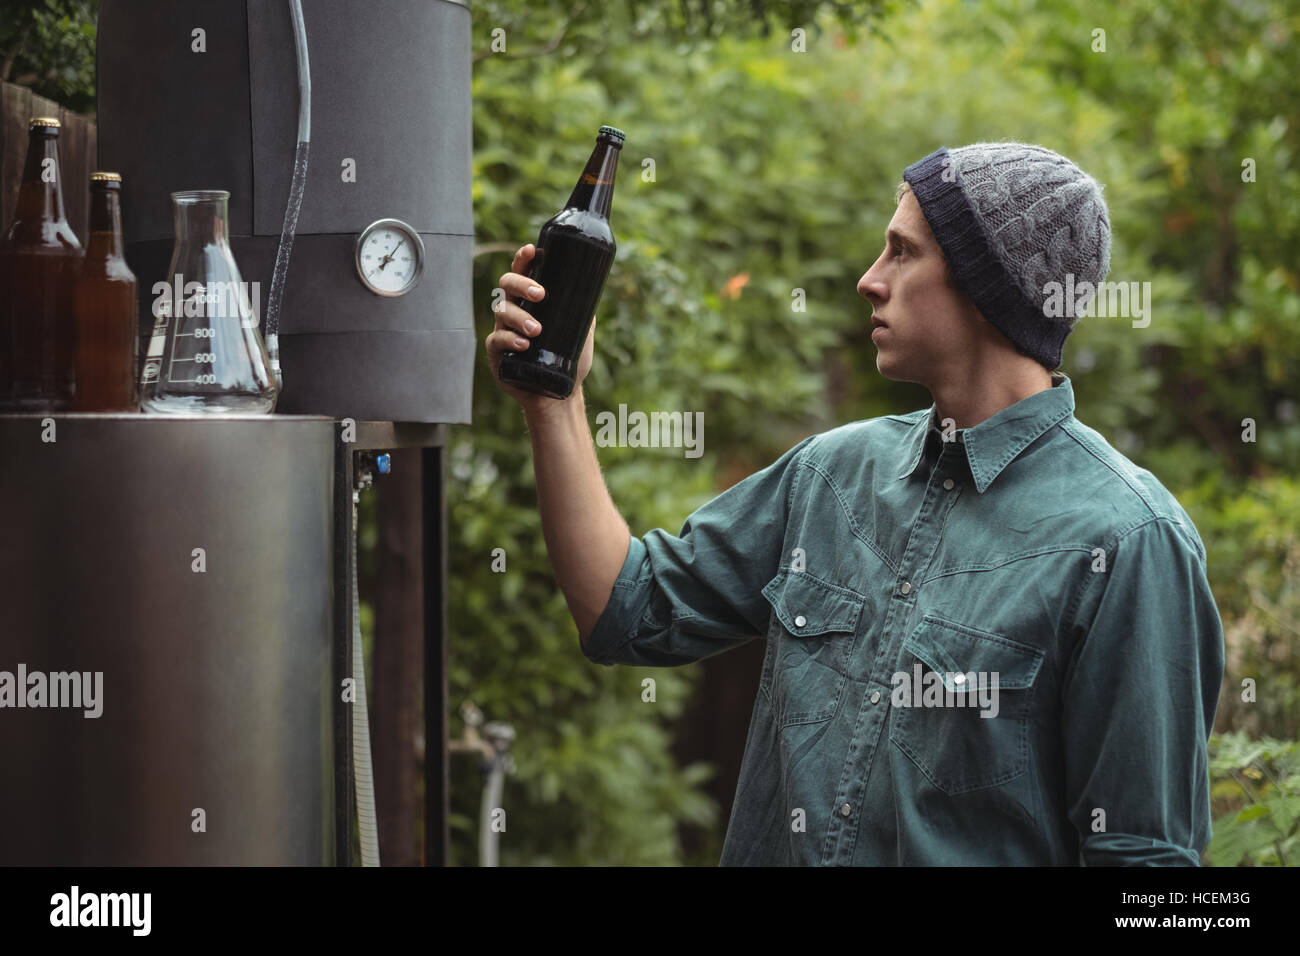 Man holding beer bottle while making beer Stock Photo